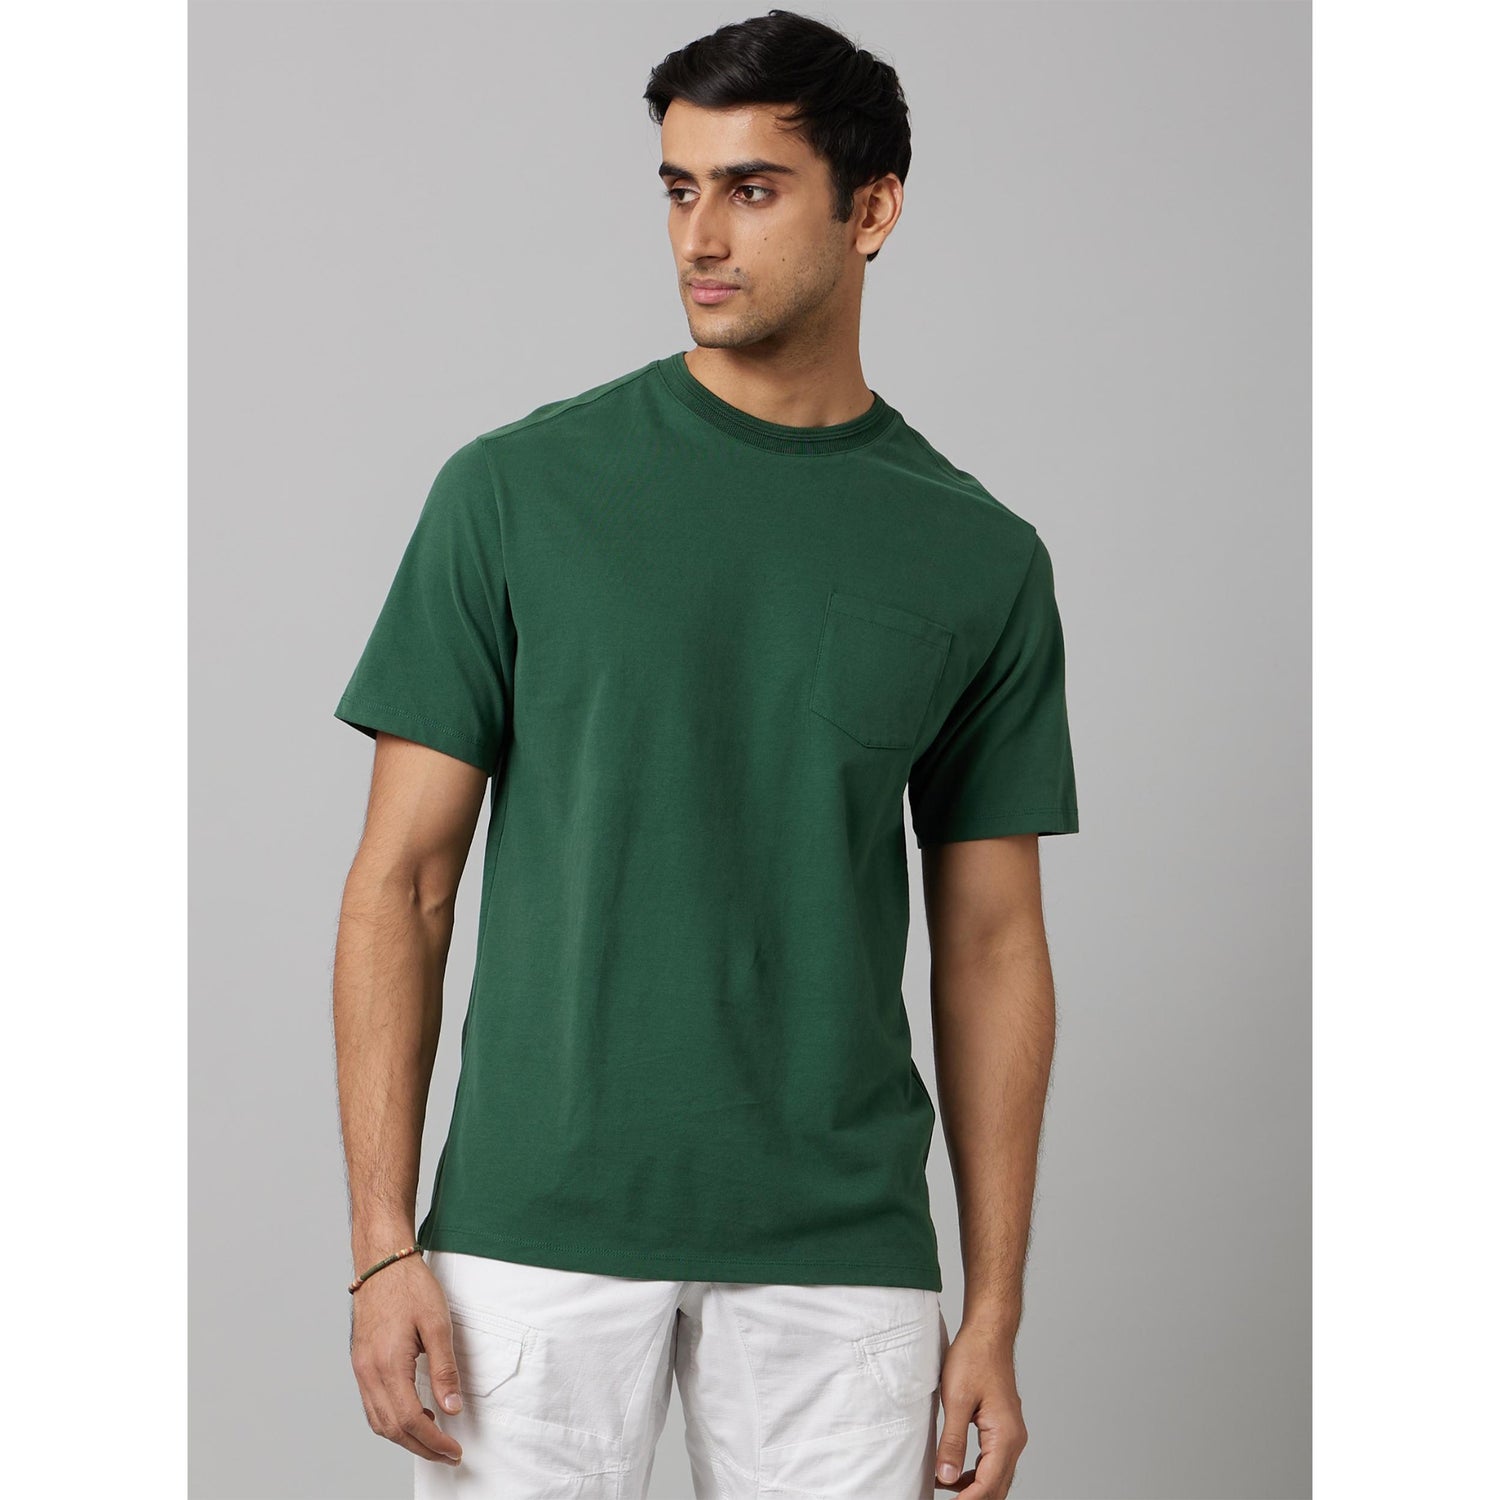 Green Round Neck Pocket Breathable Cotton T-shirt (CESOLACEIN)